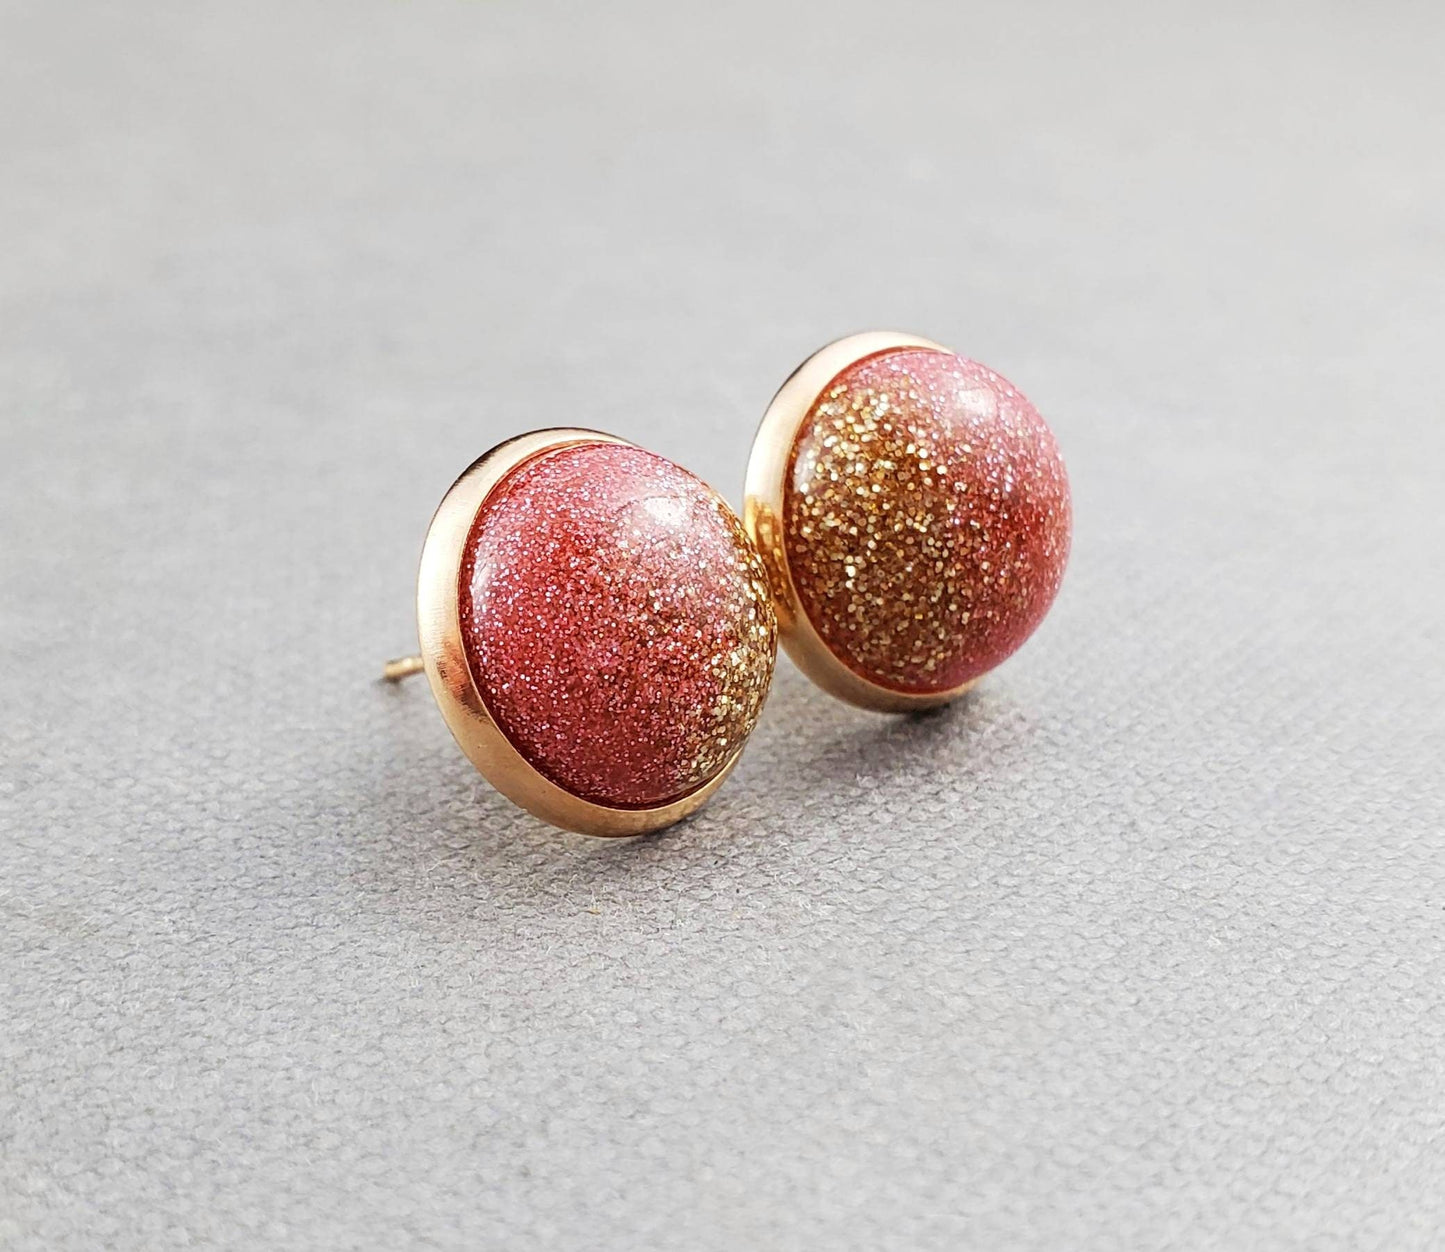 Pink and Gold Stud Earrings, Glitter Resin Jewelry, Gift for Her